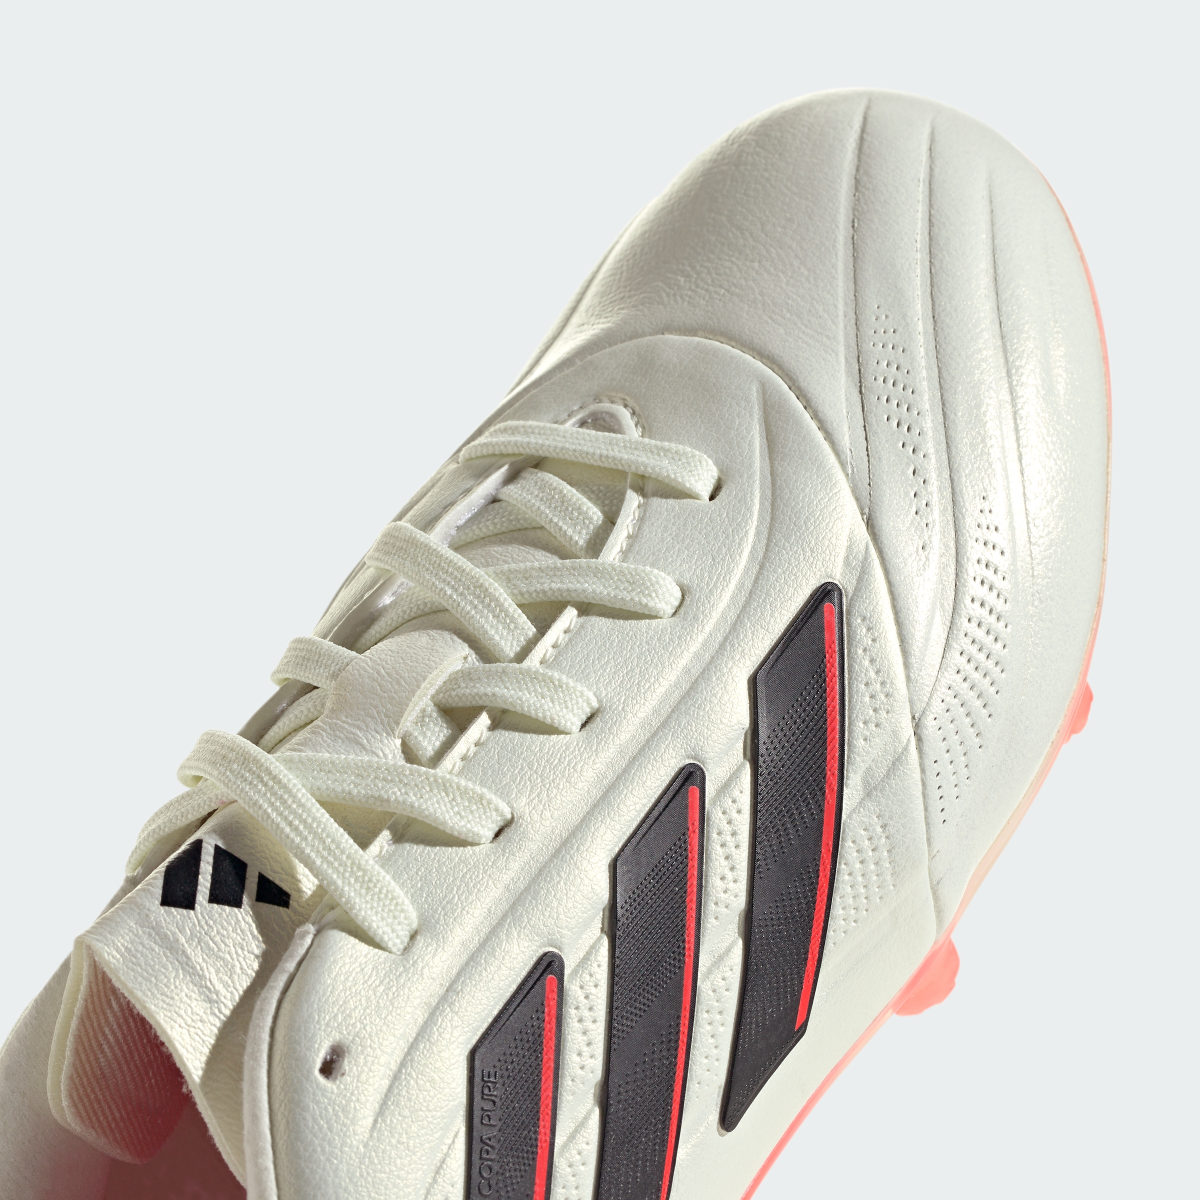 Adidas Copa Pure II Elite Firm Ground Boots. 10